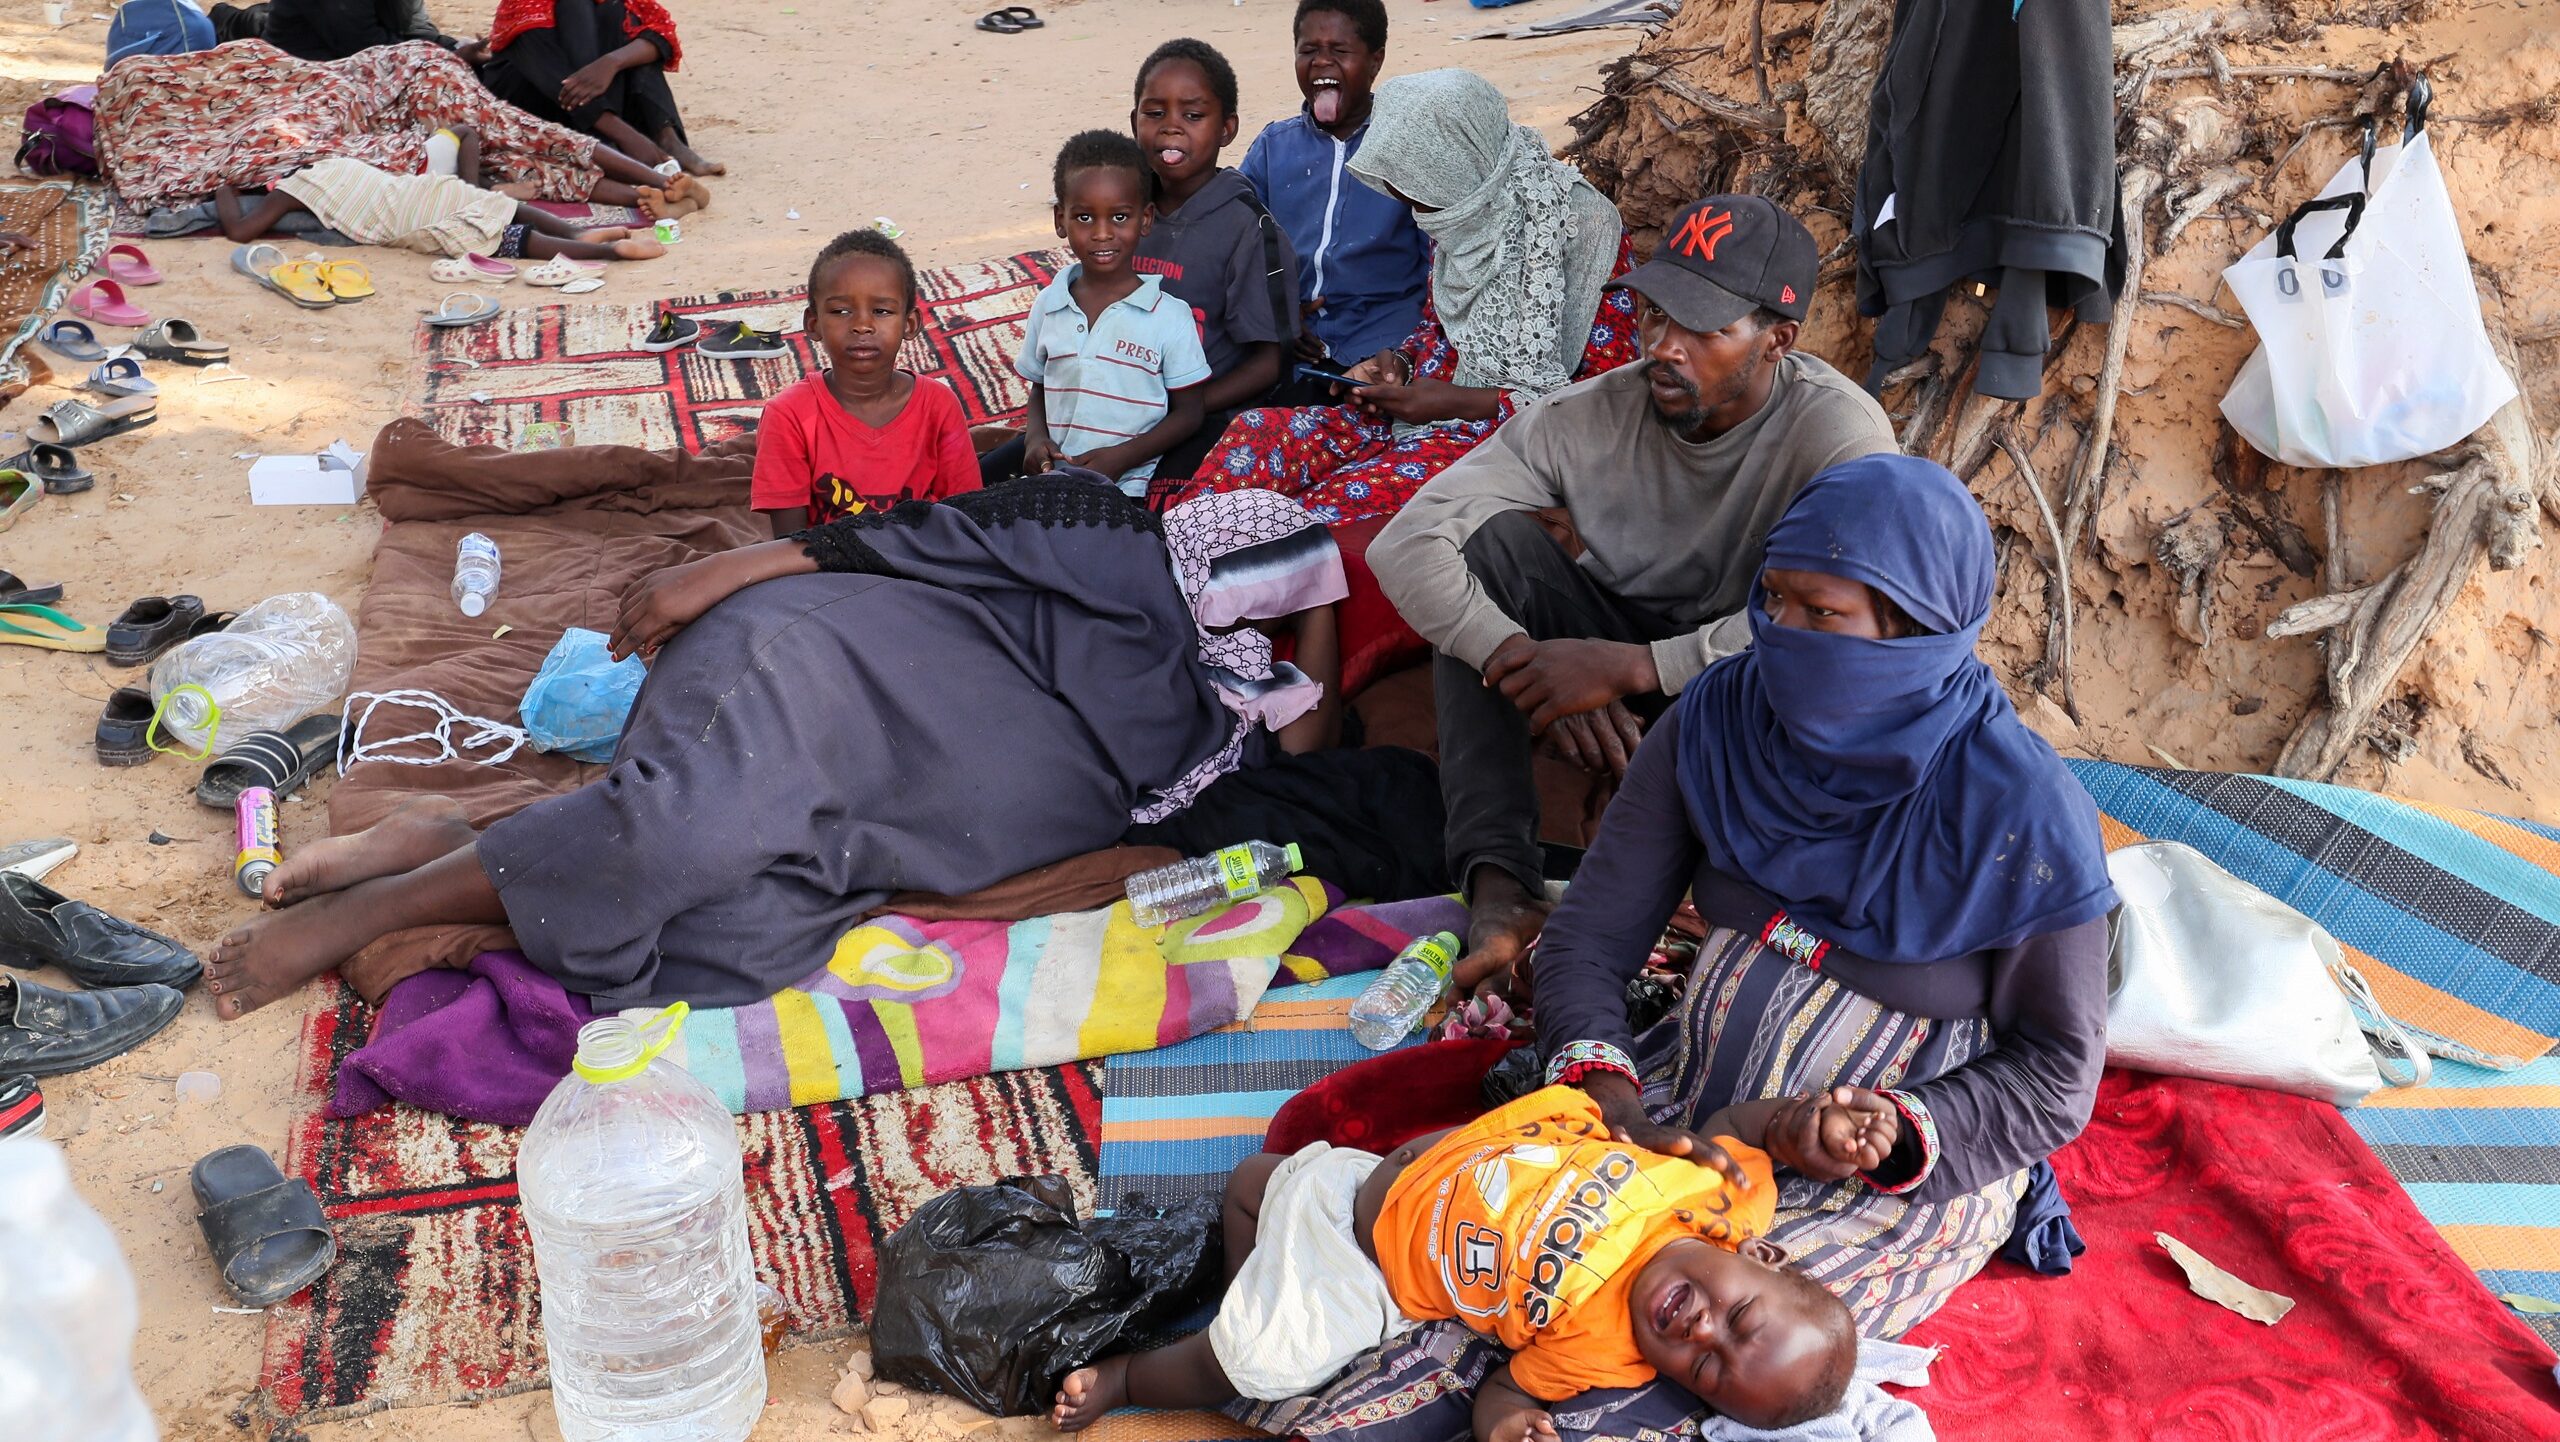 UN Reports Nearly 5 Million Displaced by Sudan Conflict